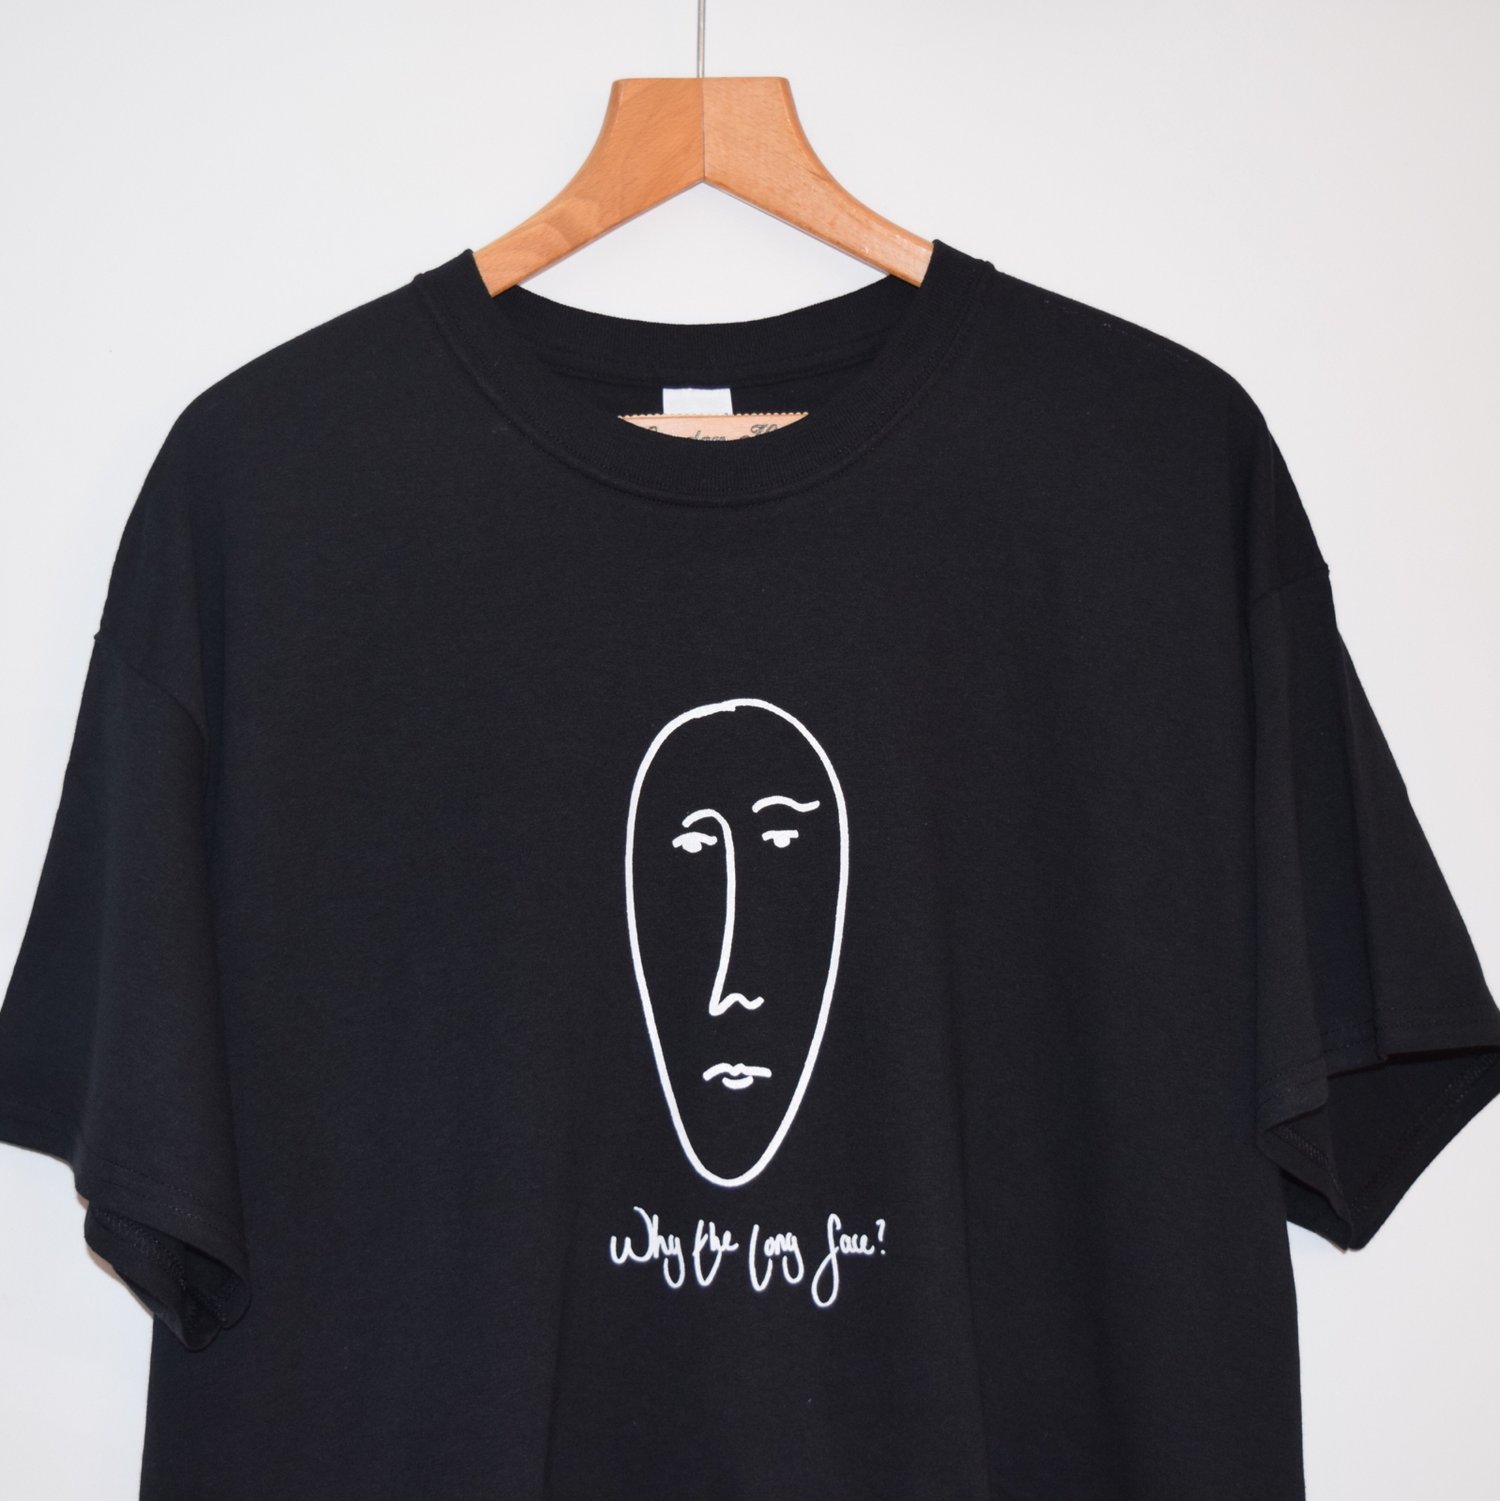 Image of Why The Long Face Tee in Black